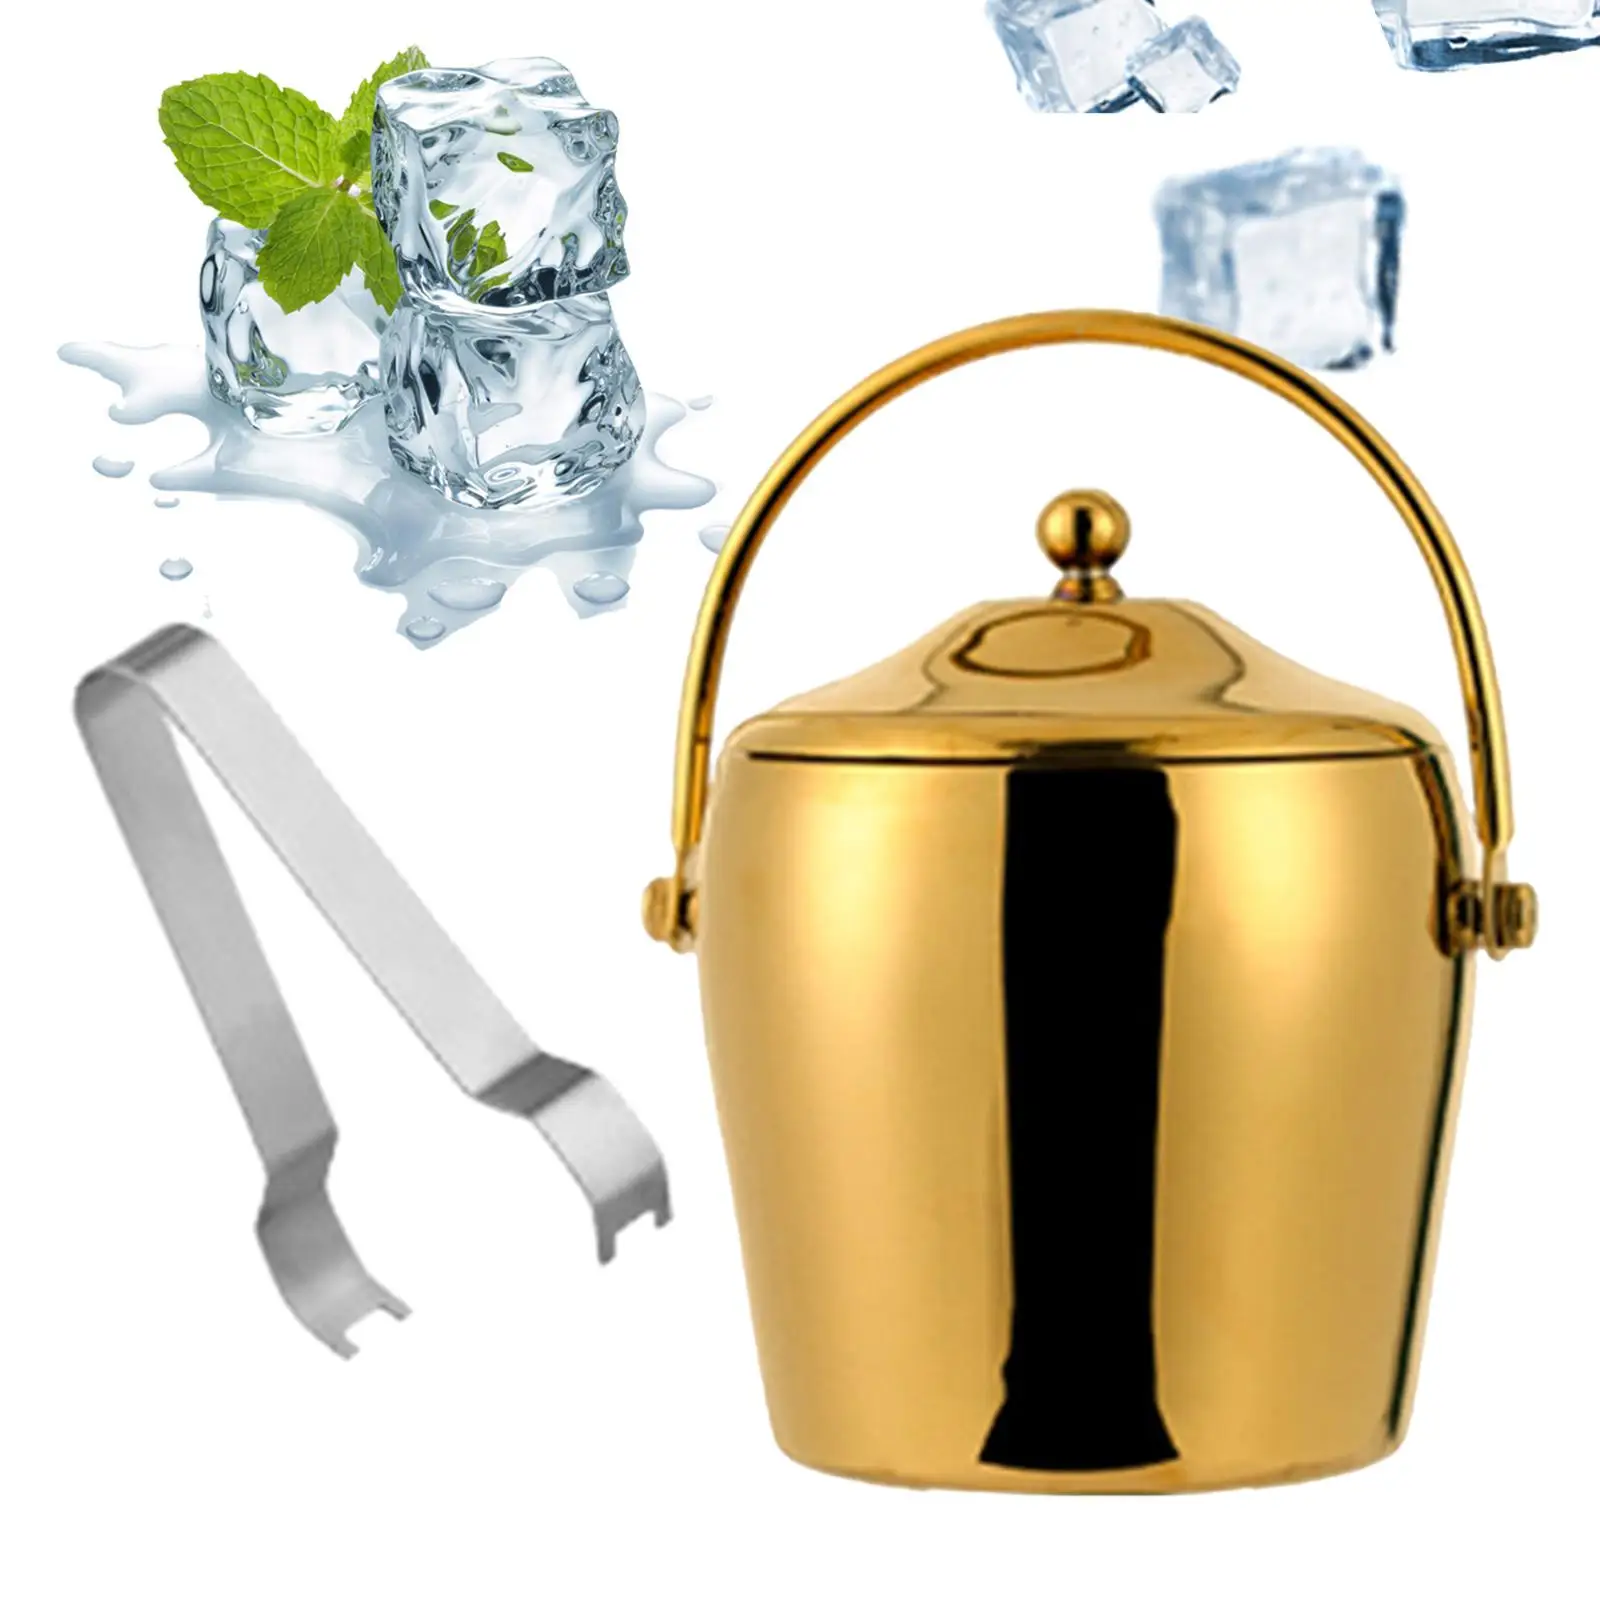 Double Wall Ice Bucket Fashionable Drinks Cooling Bucket with Handle Insulated Ice Bucket for Bar Party Picnic BBQ Cocktail